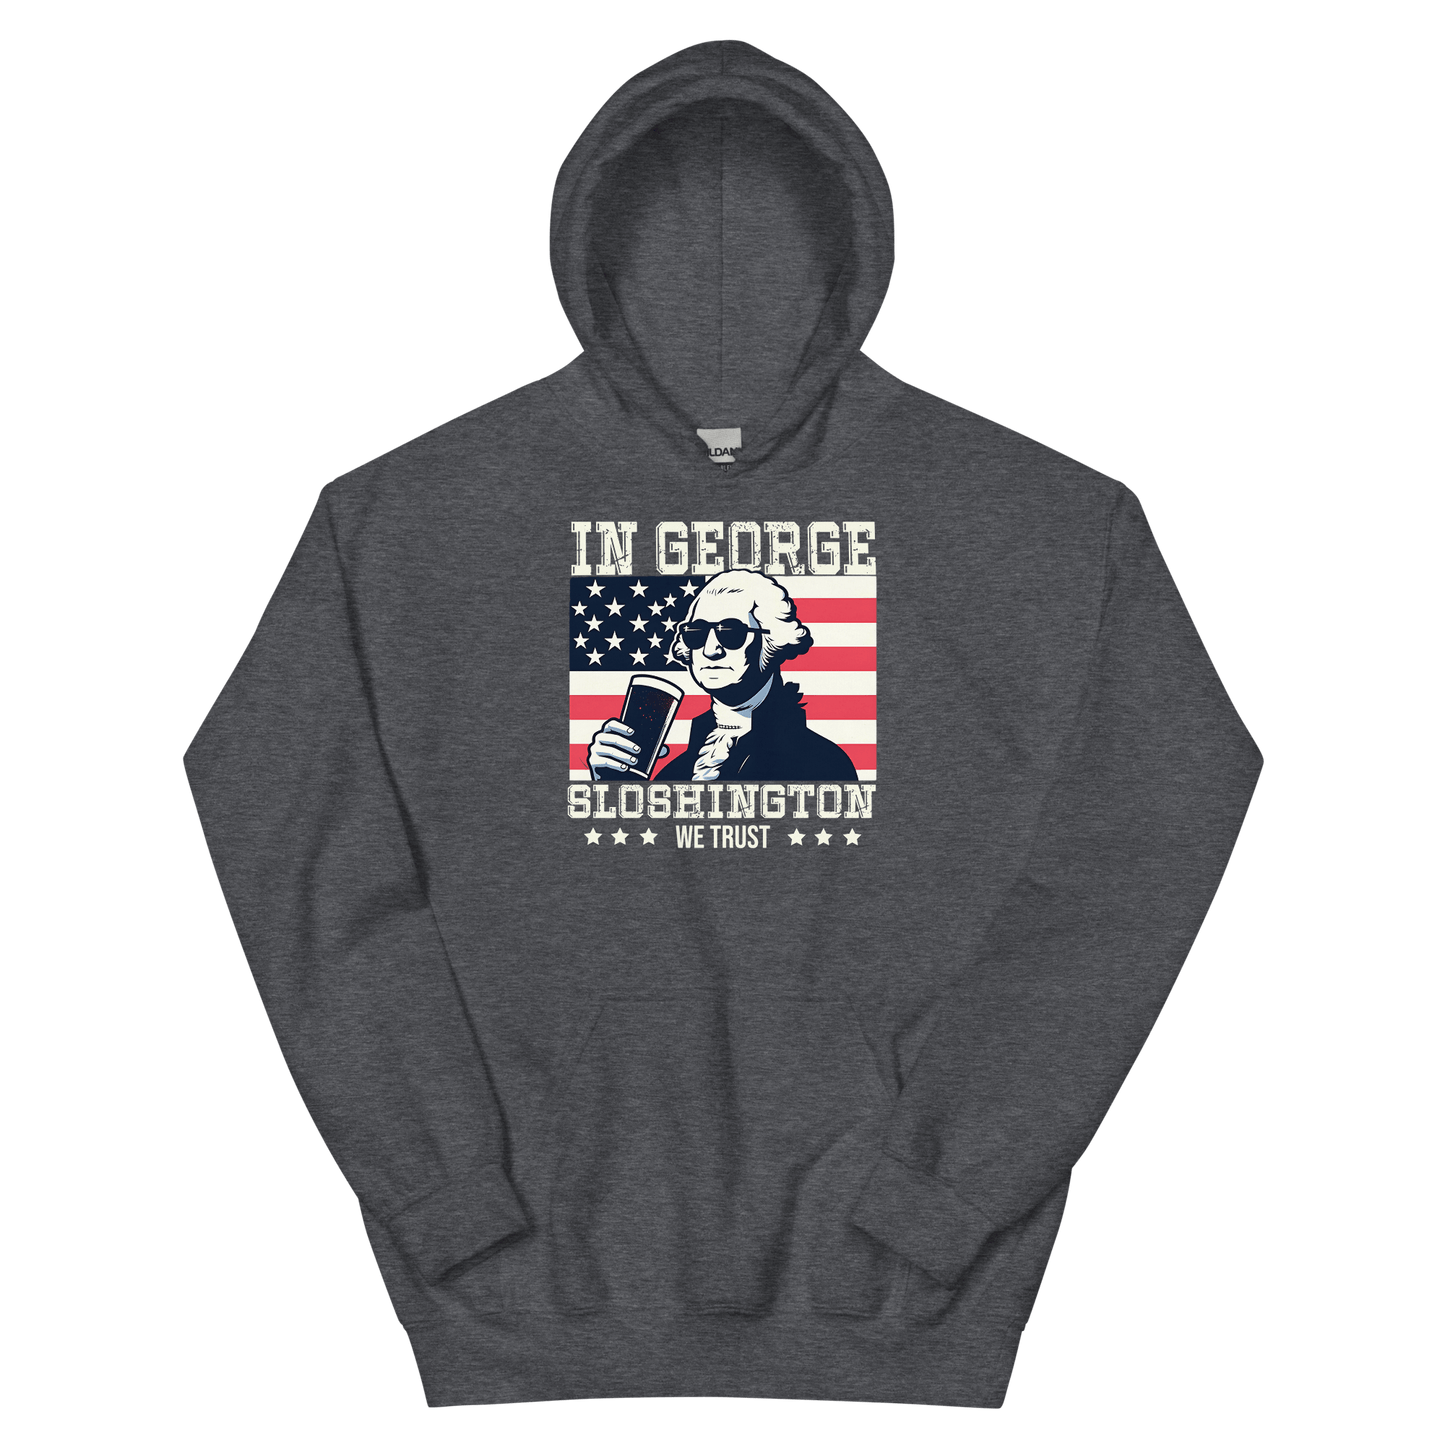 Hoodie with In George Sloshington We Trust text, image of George Washington drinking a beer, and distressed American flag background. Perfect for 4th of July.